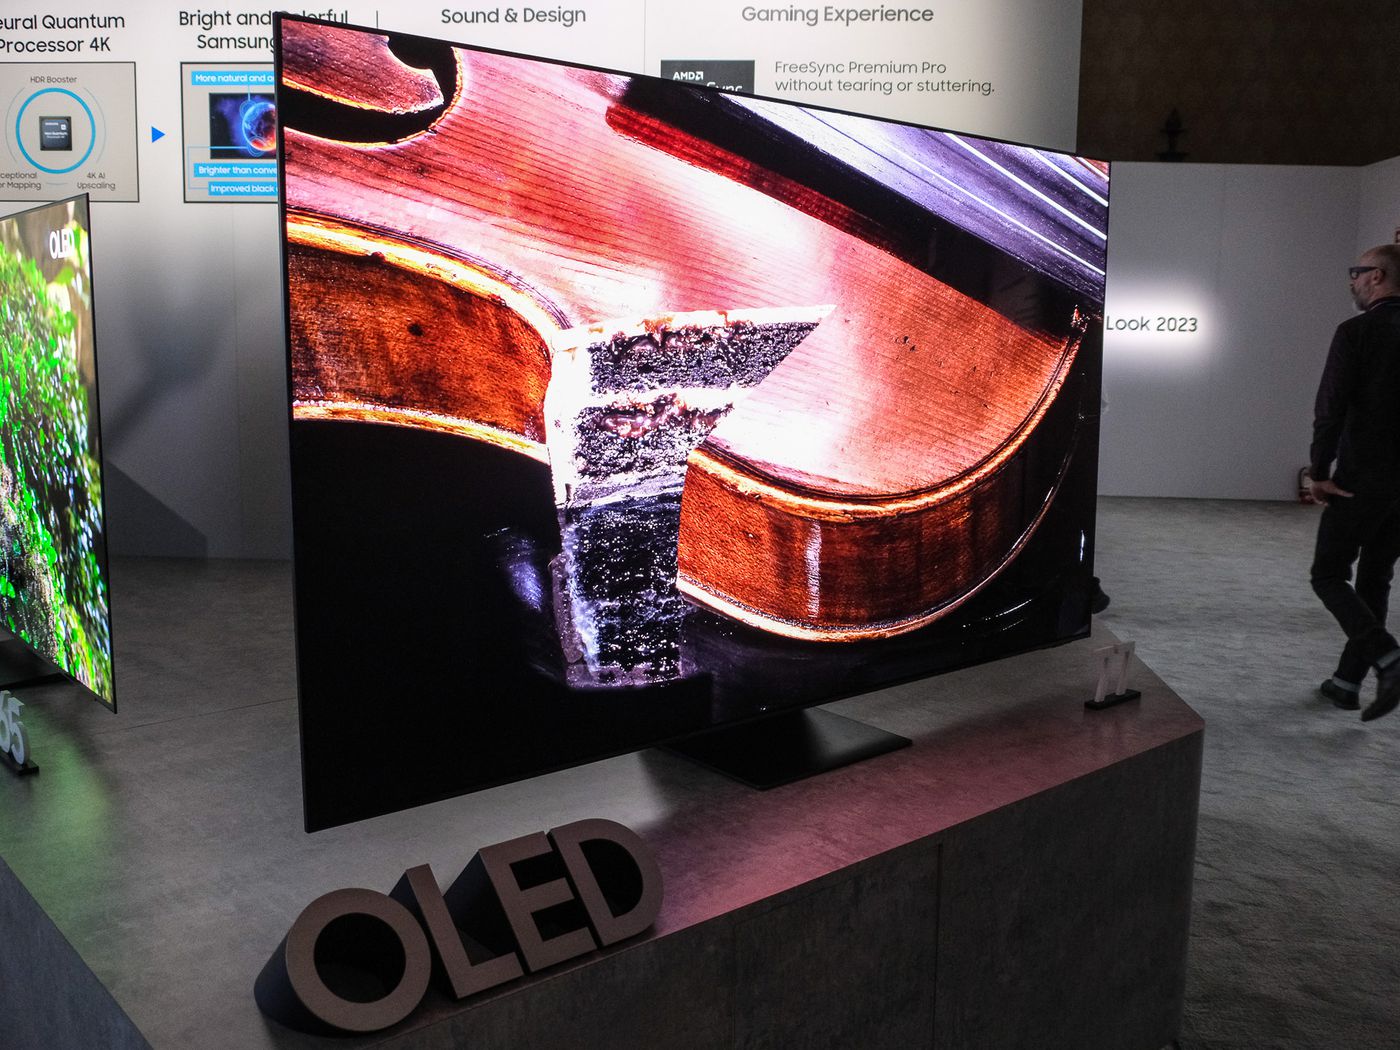 Samsung prices its super bright 77-inch QD-OLED TV $4,500 - The Verge